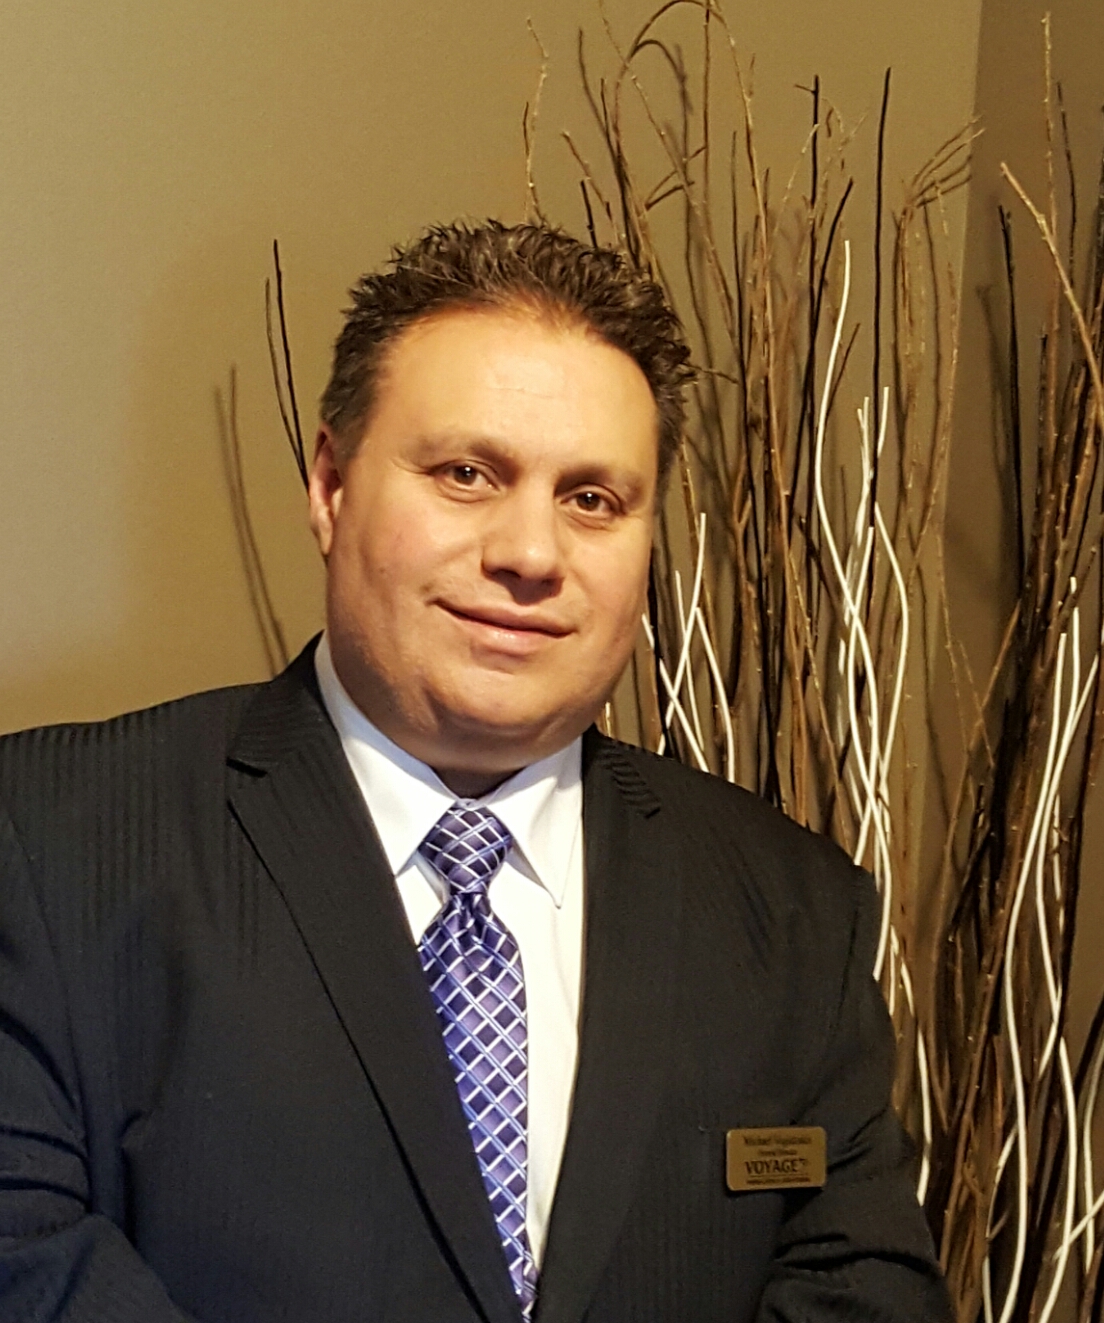 Mike Vogiatzakis - Funeral Director and Owner of Voyage